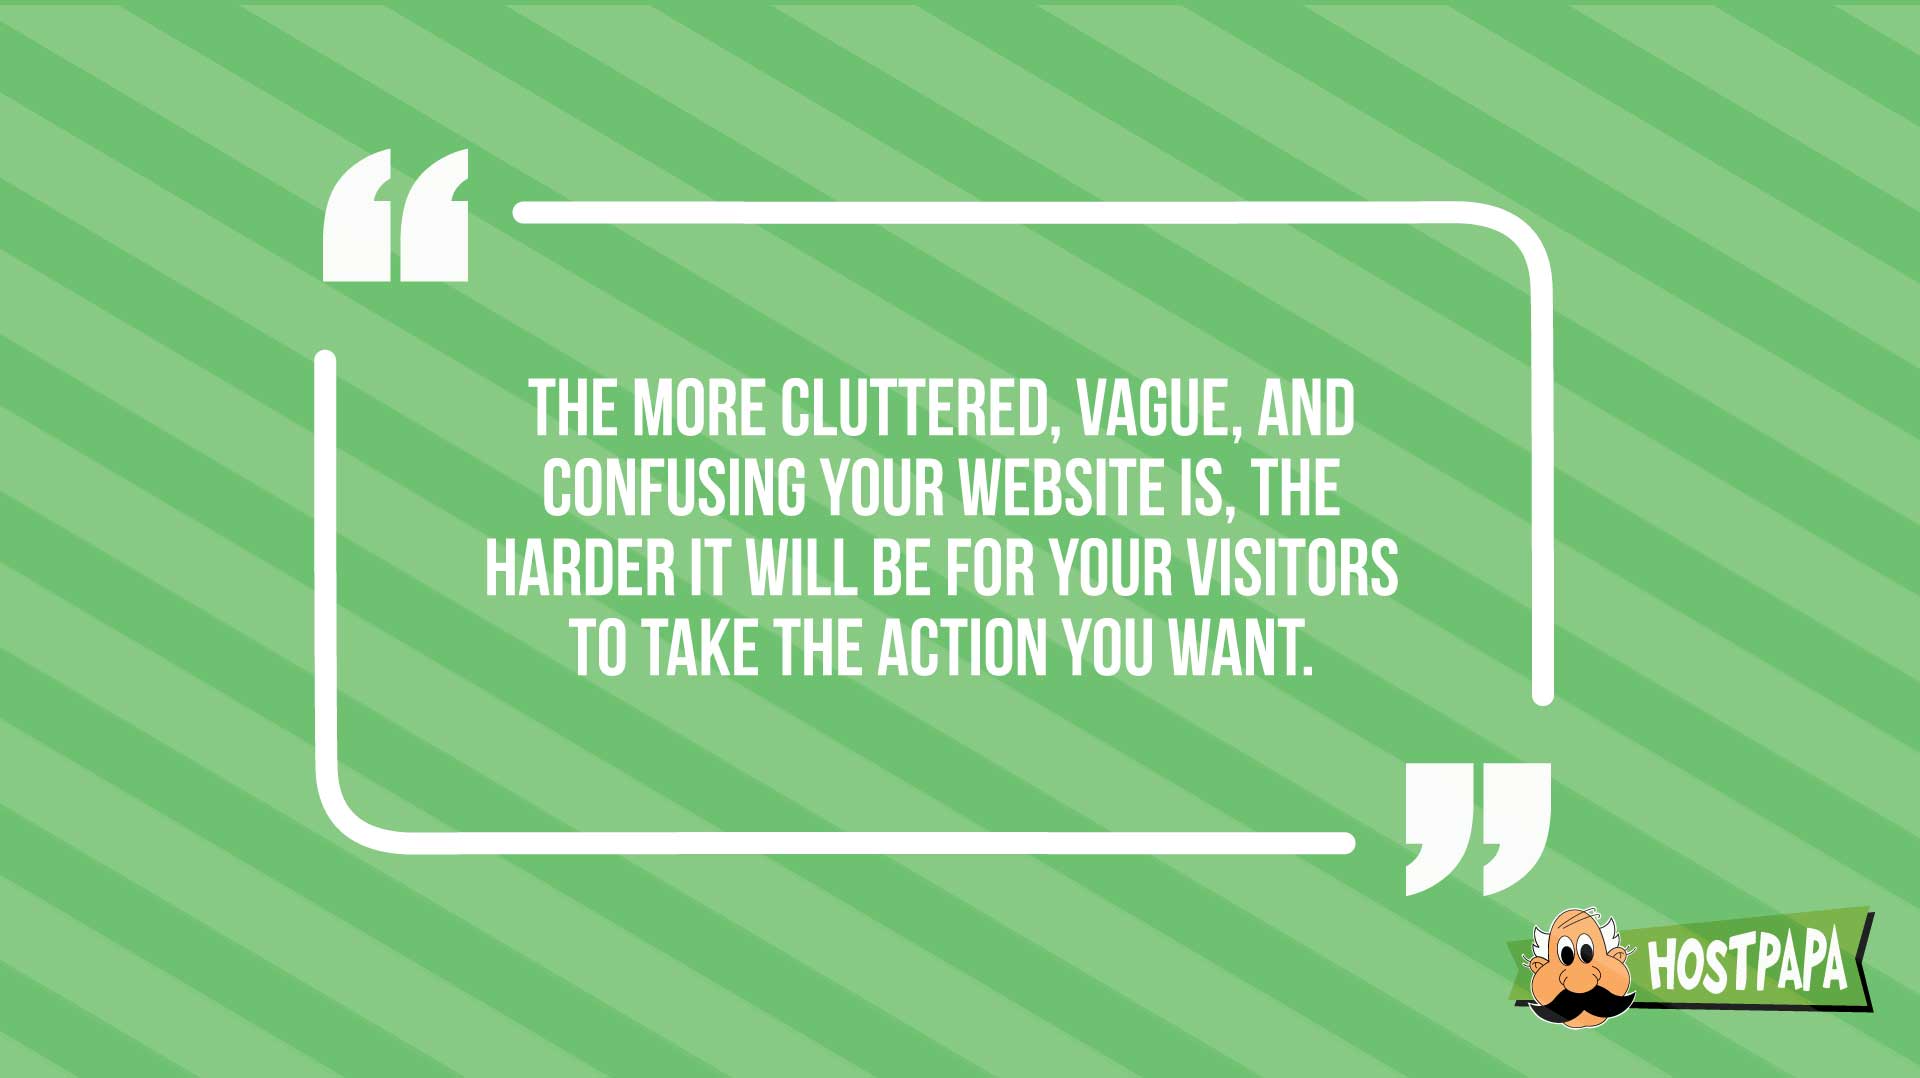 The more cluttered, vague and confussing your website is, the harder it will ve for your visitors to take the action you want.